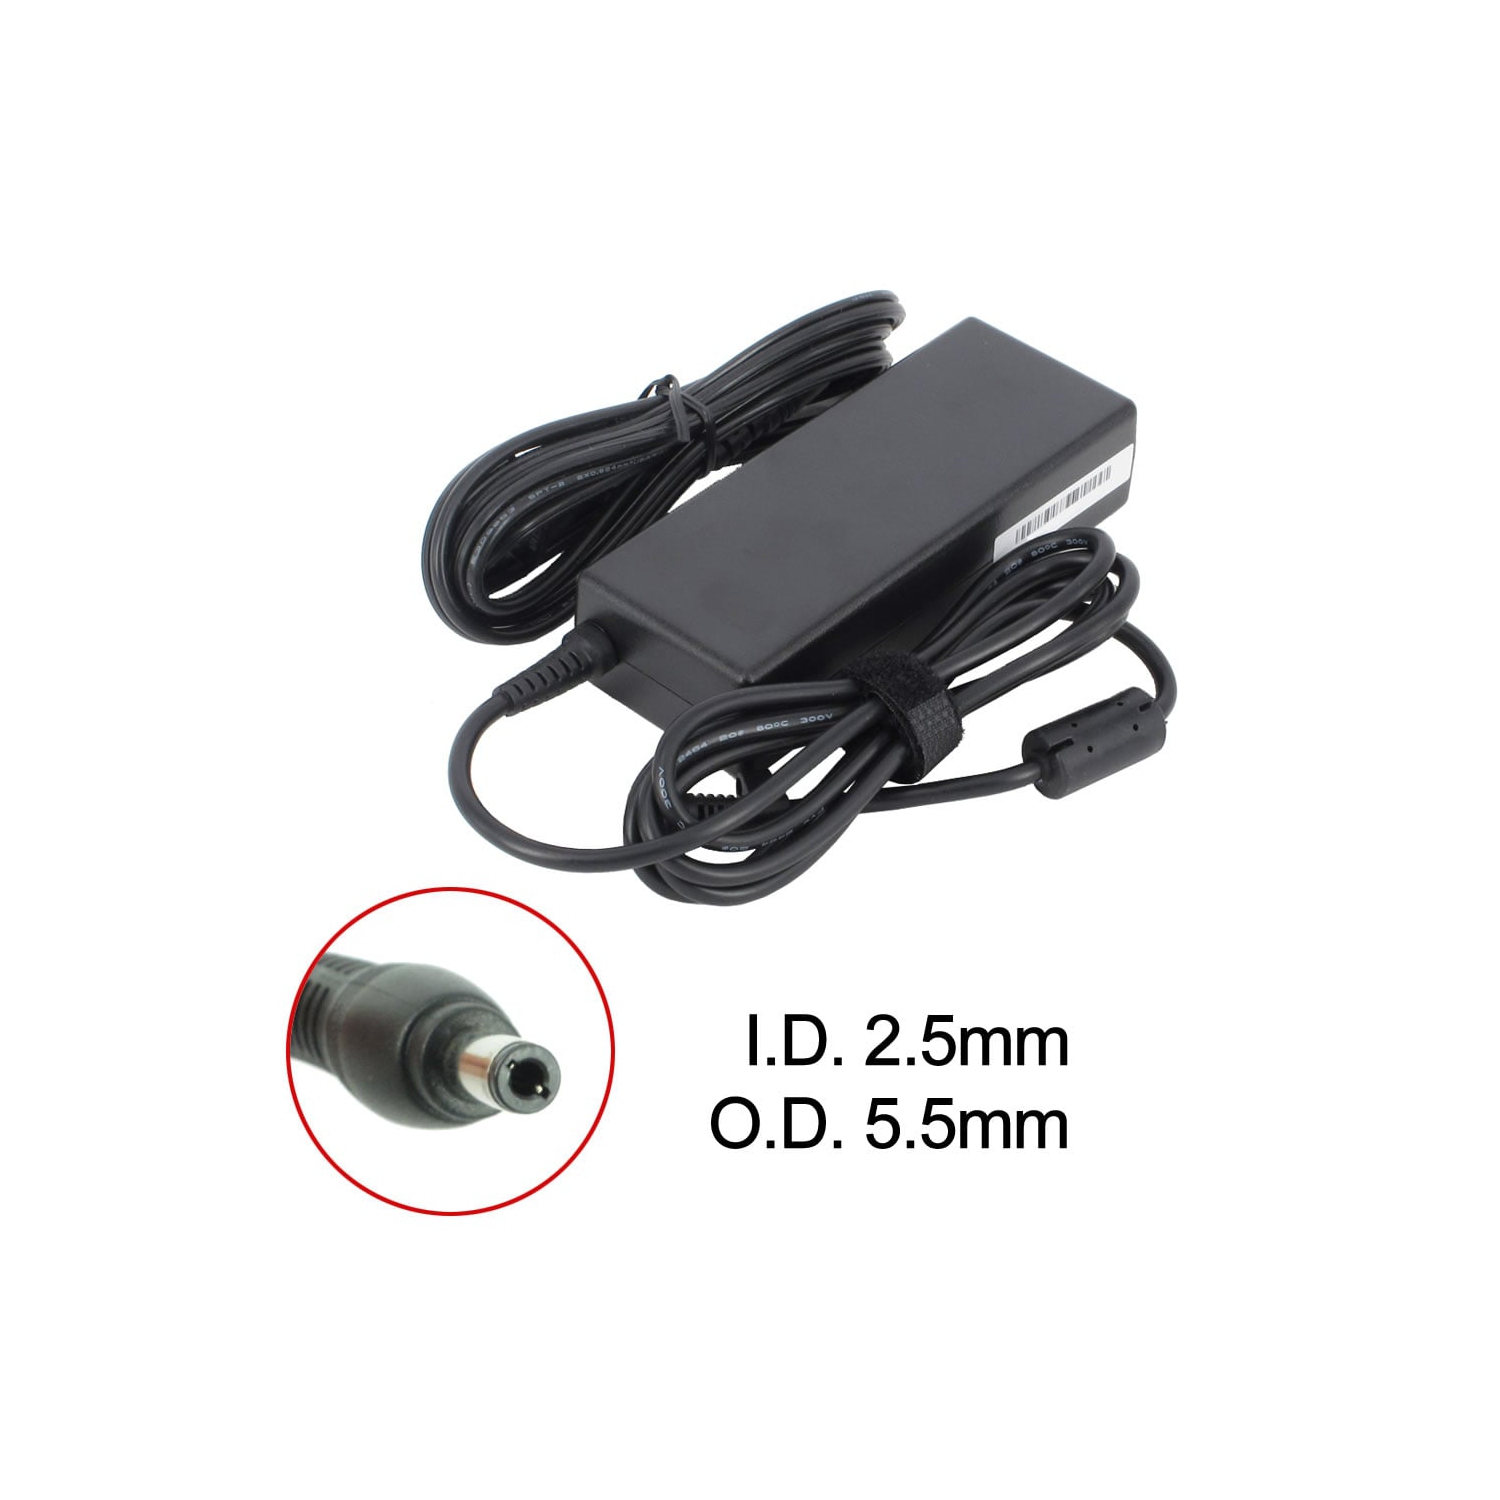 BATTDEPOT New Laptop AC Adapter for Asus Pro66IC 04G266006080 2521997R  90-N00PW5700T ADP-90CD PA-1480-19T PA3164U